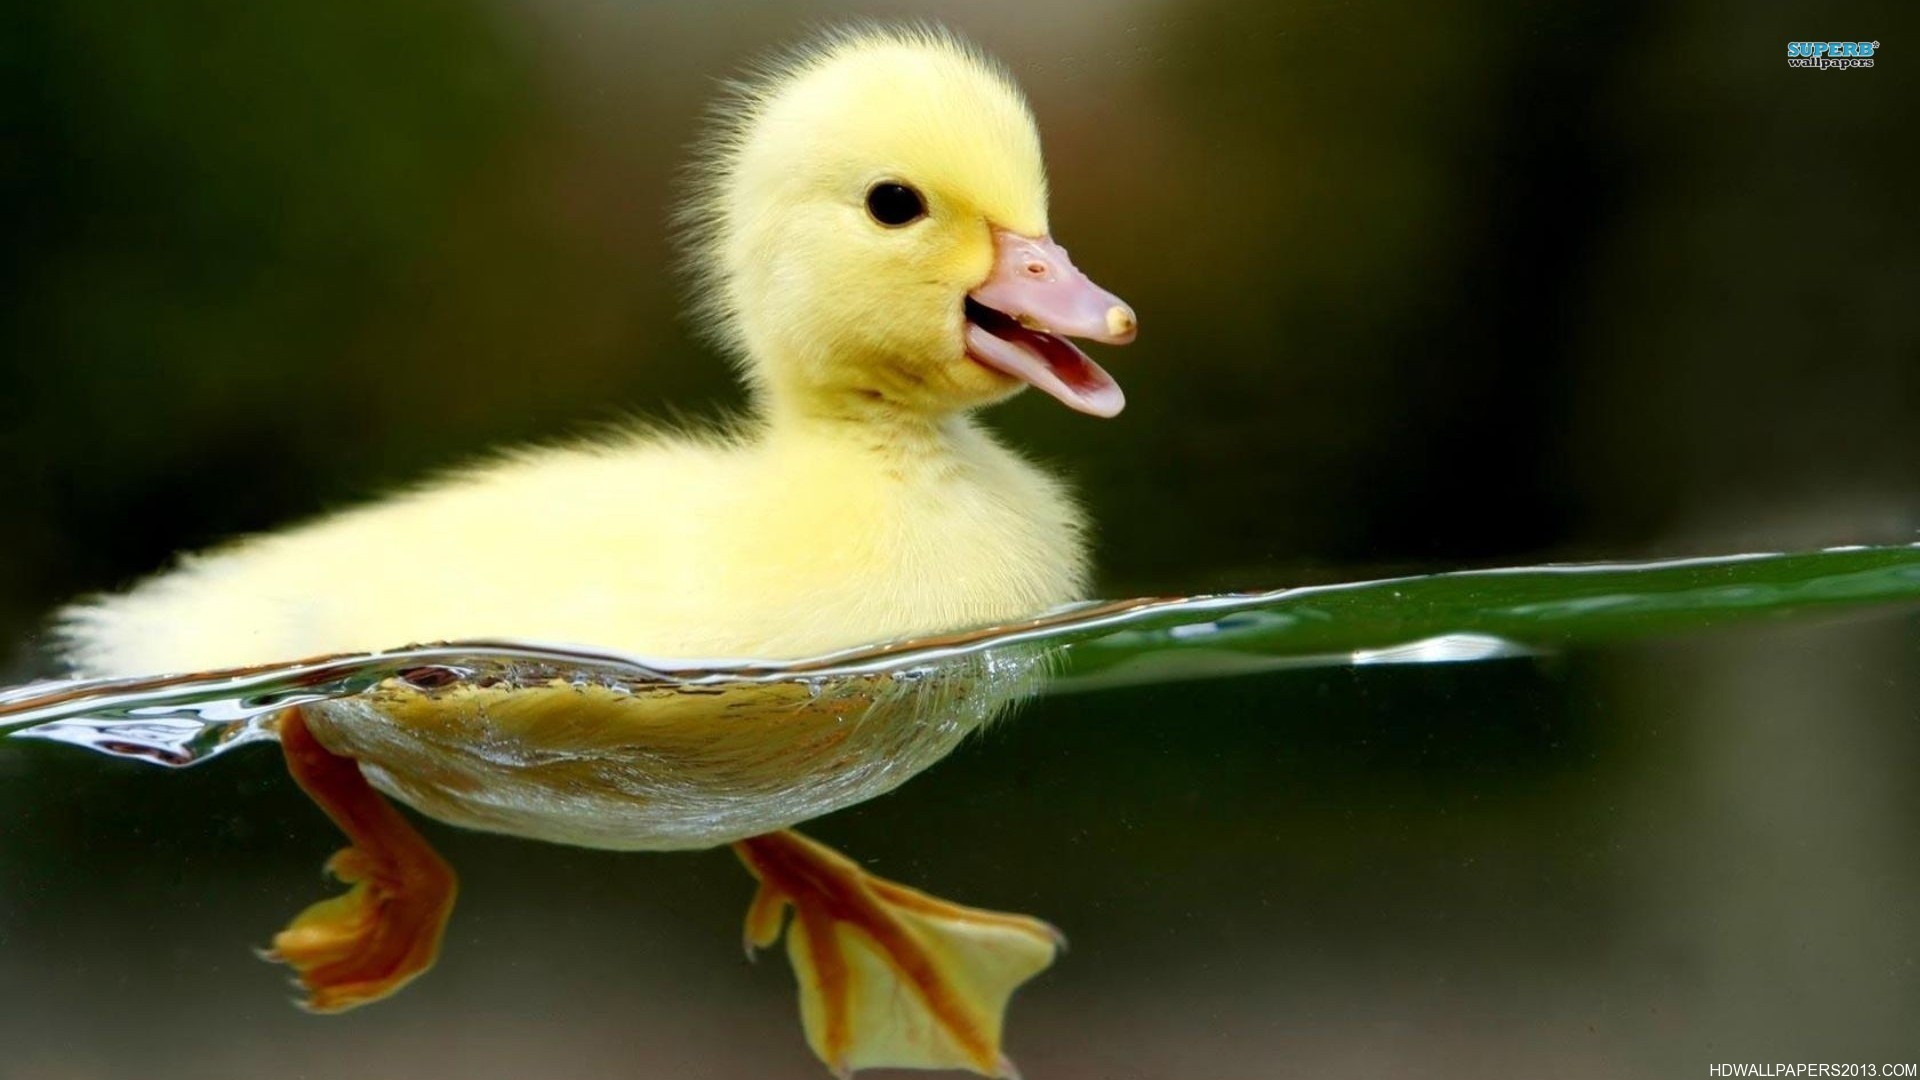 Cute Little Duckling | High Definition Wallpapers, High Definition ...